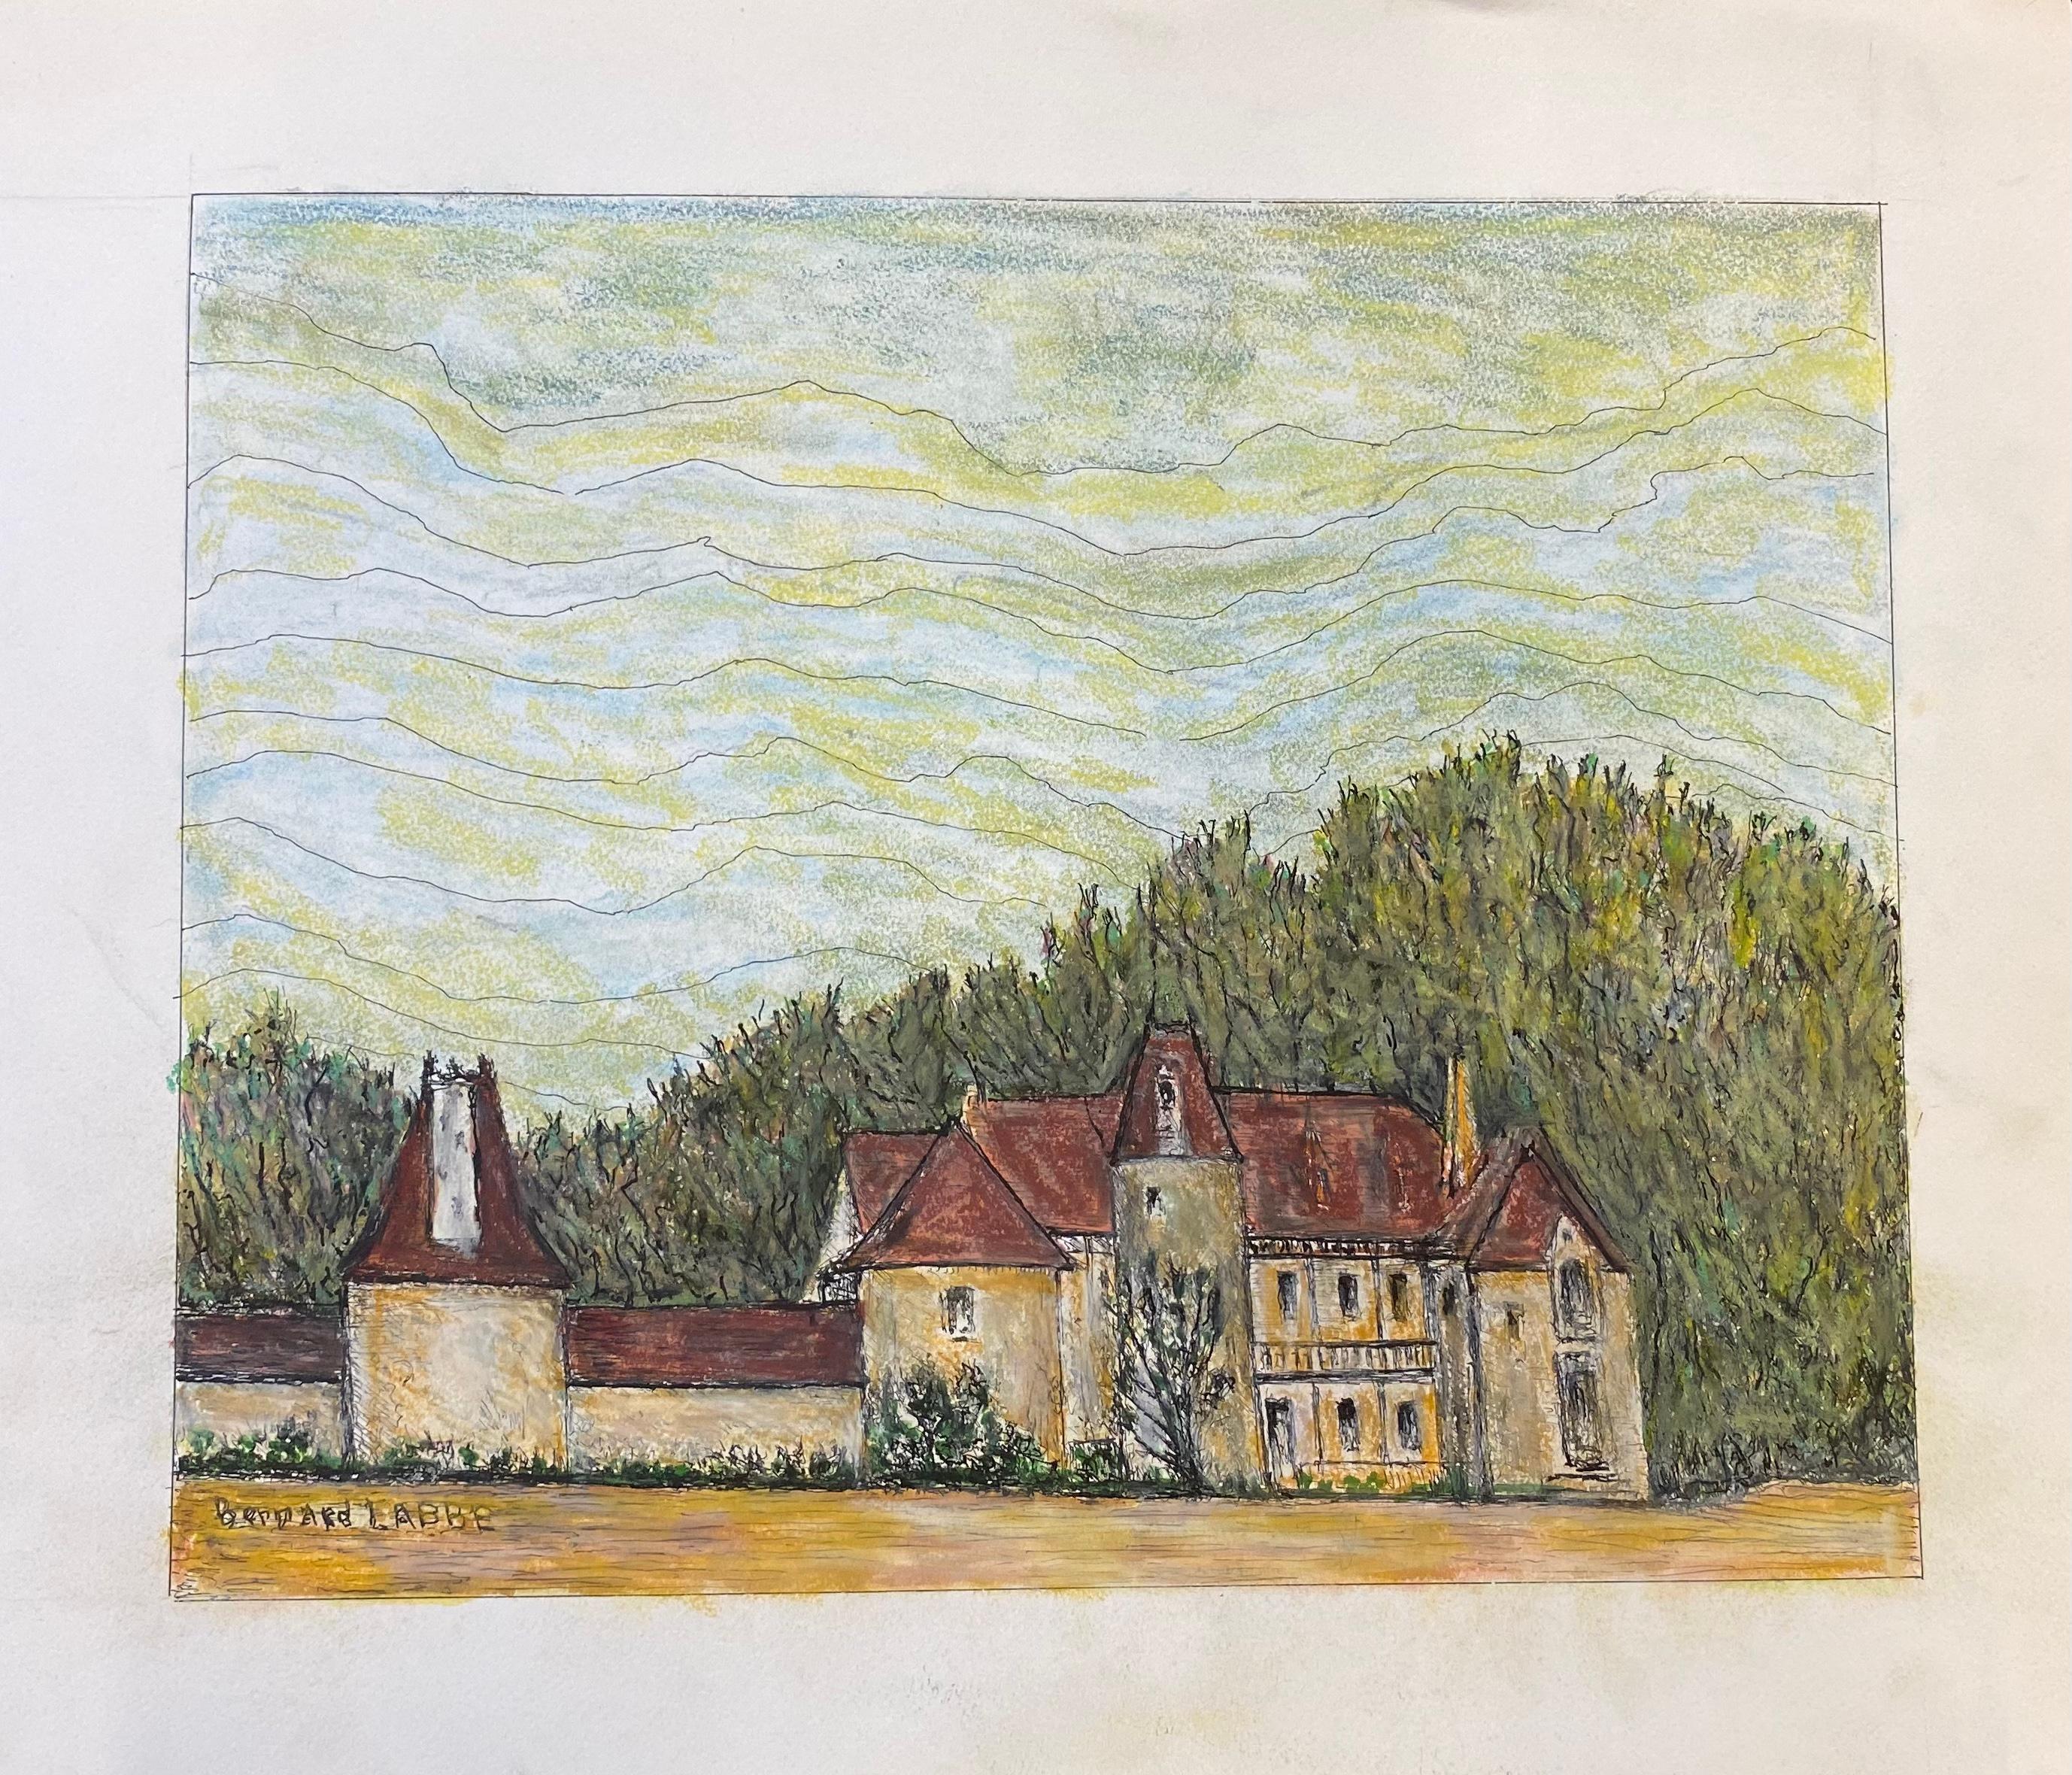 French Chateau
by Bernard Labbe (French mid 20th century)
signed original watercolor/ gouache painting on artist paper, unframed
size: 13 x 15 inches
condition: very good and ready to be enjoyed. 

provenance: the artists atelier/ studio,